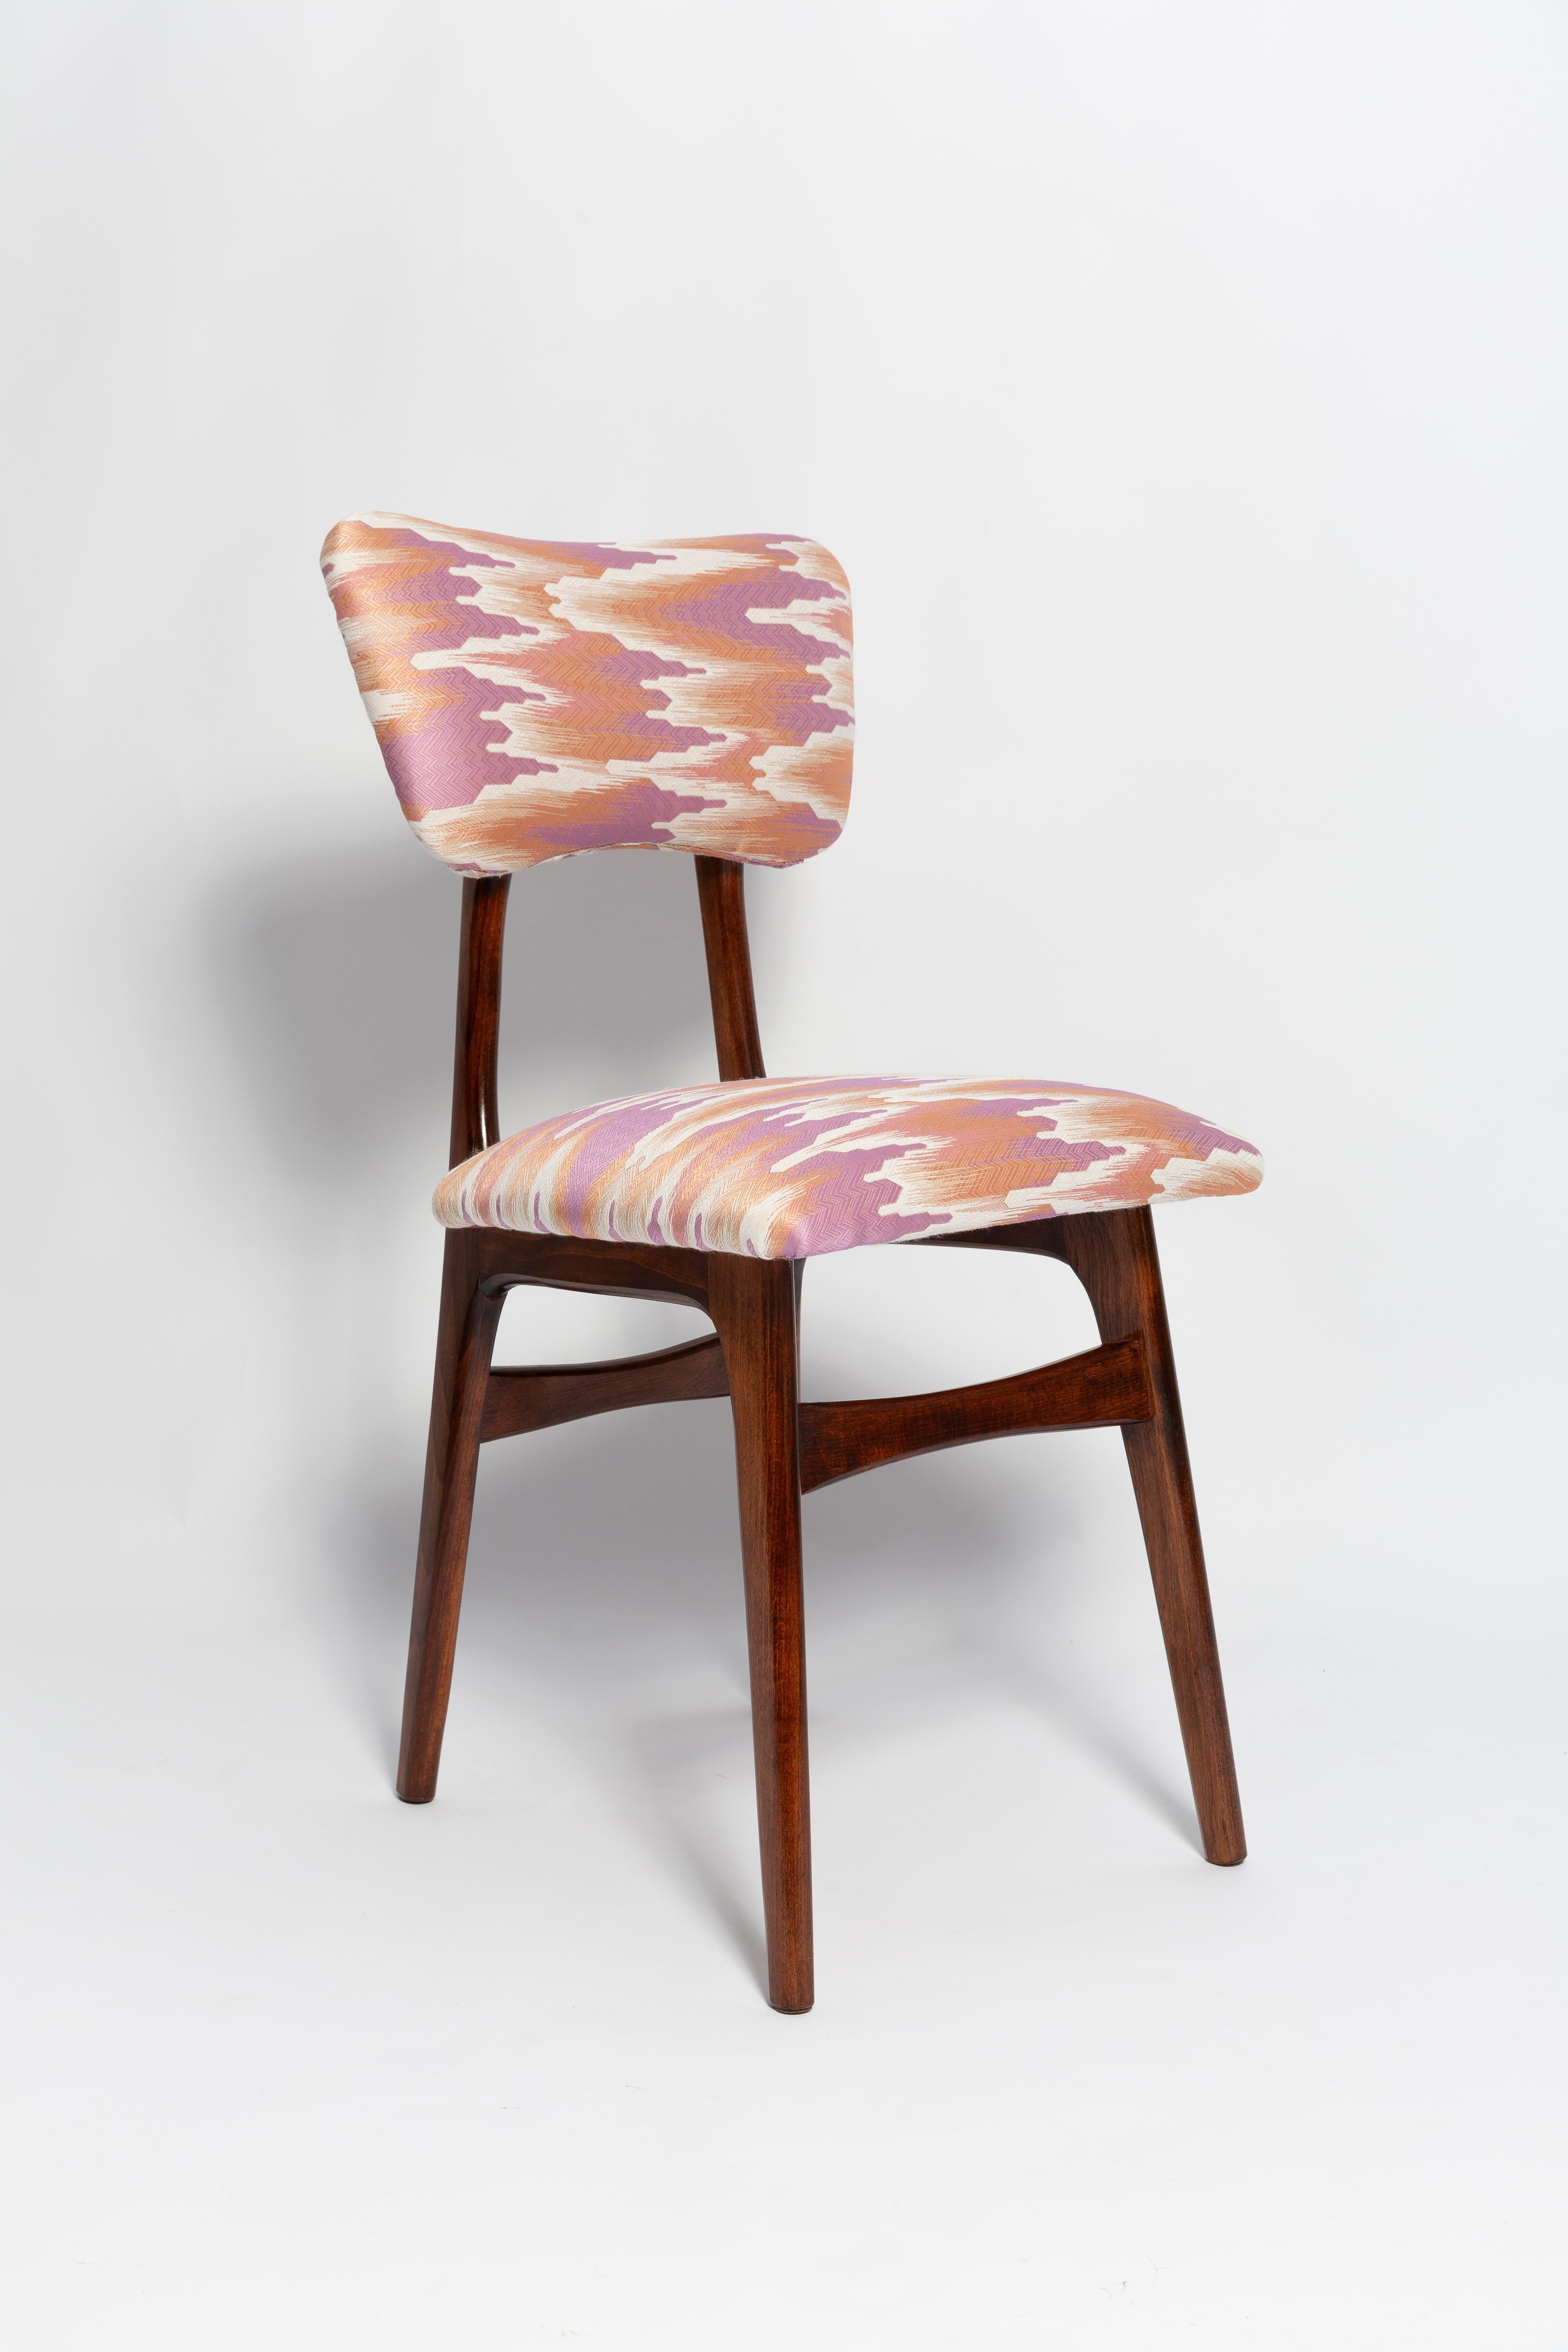 Polish Mid Century Butterfly Chair and Stool Fandango Jacquard, Dark Wood, Europe 1960s For Sale